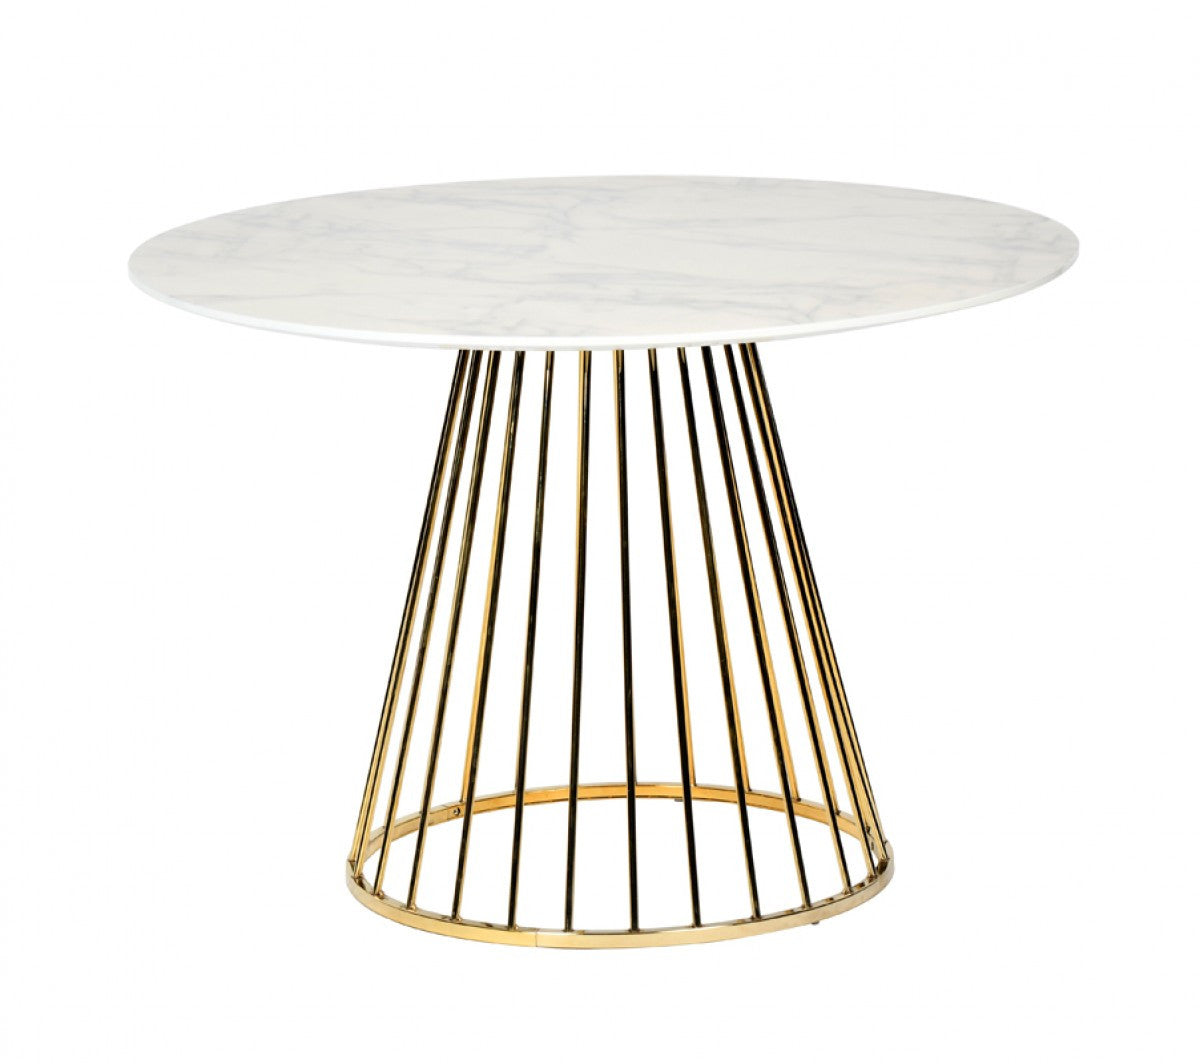 43" White And Gold Rounded Manufactured Wood And Stainless Steel Dining Table